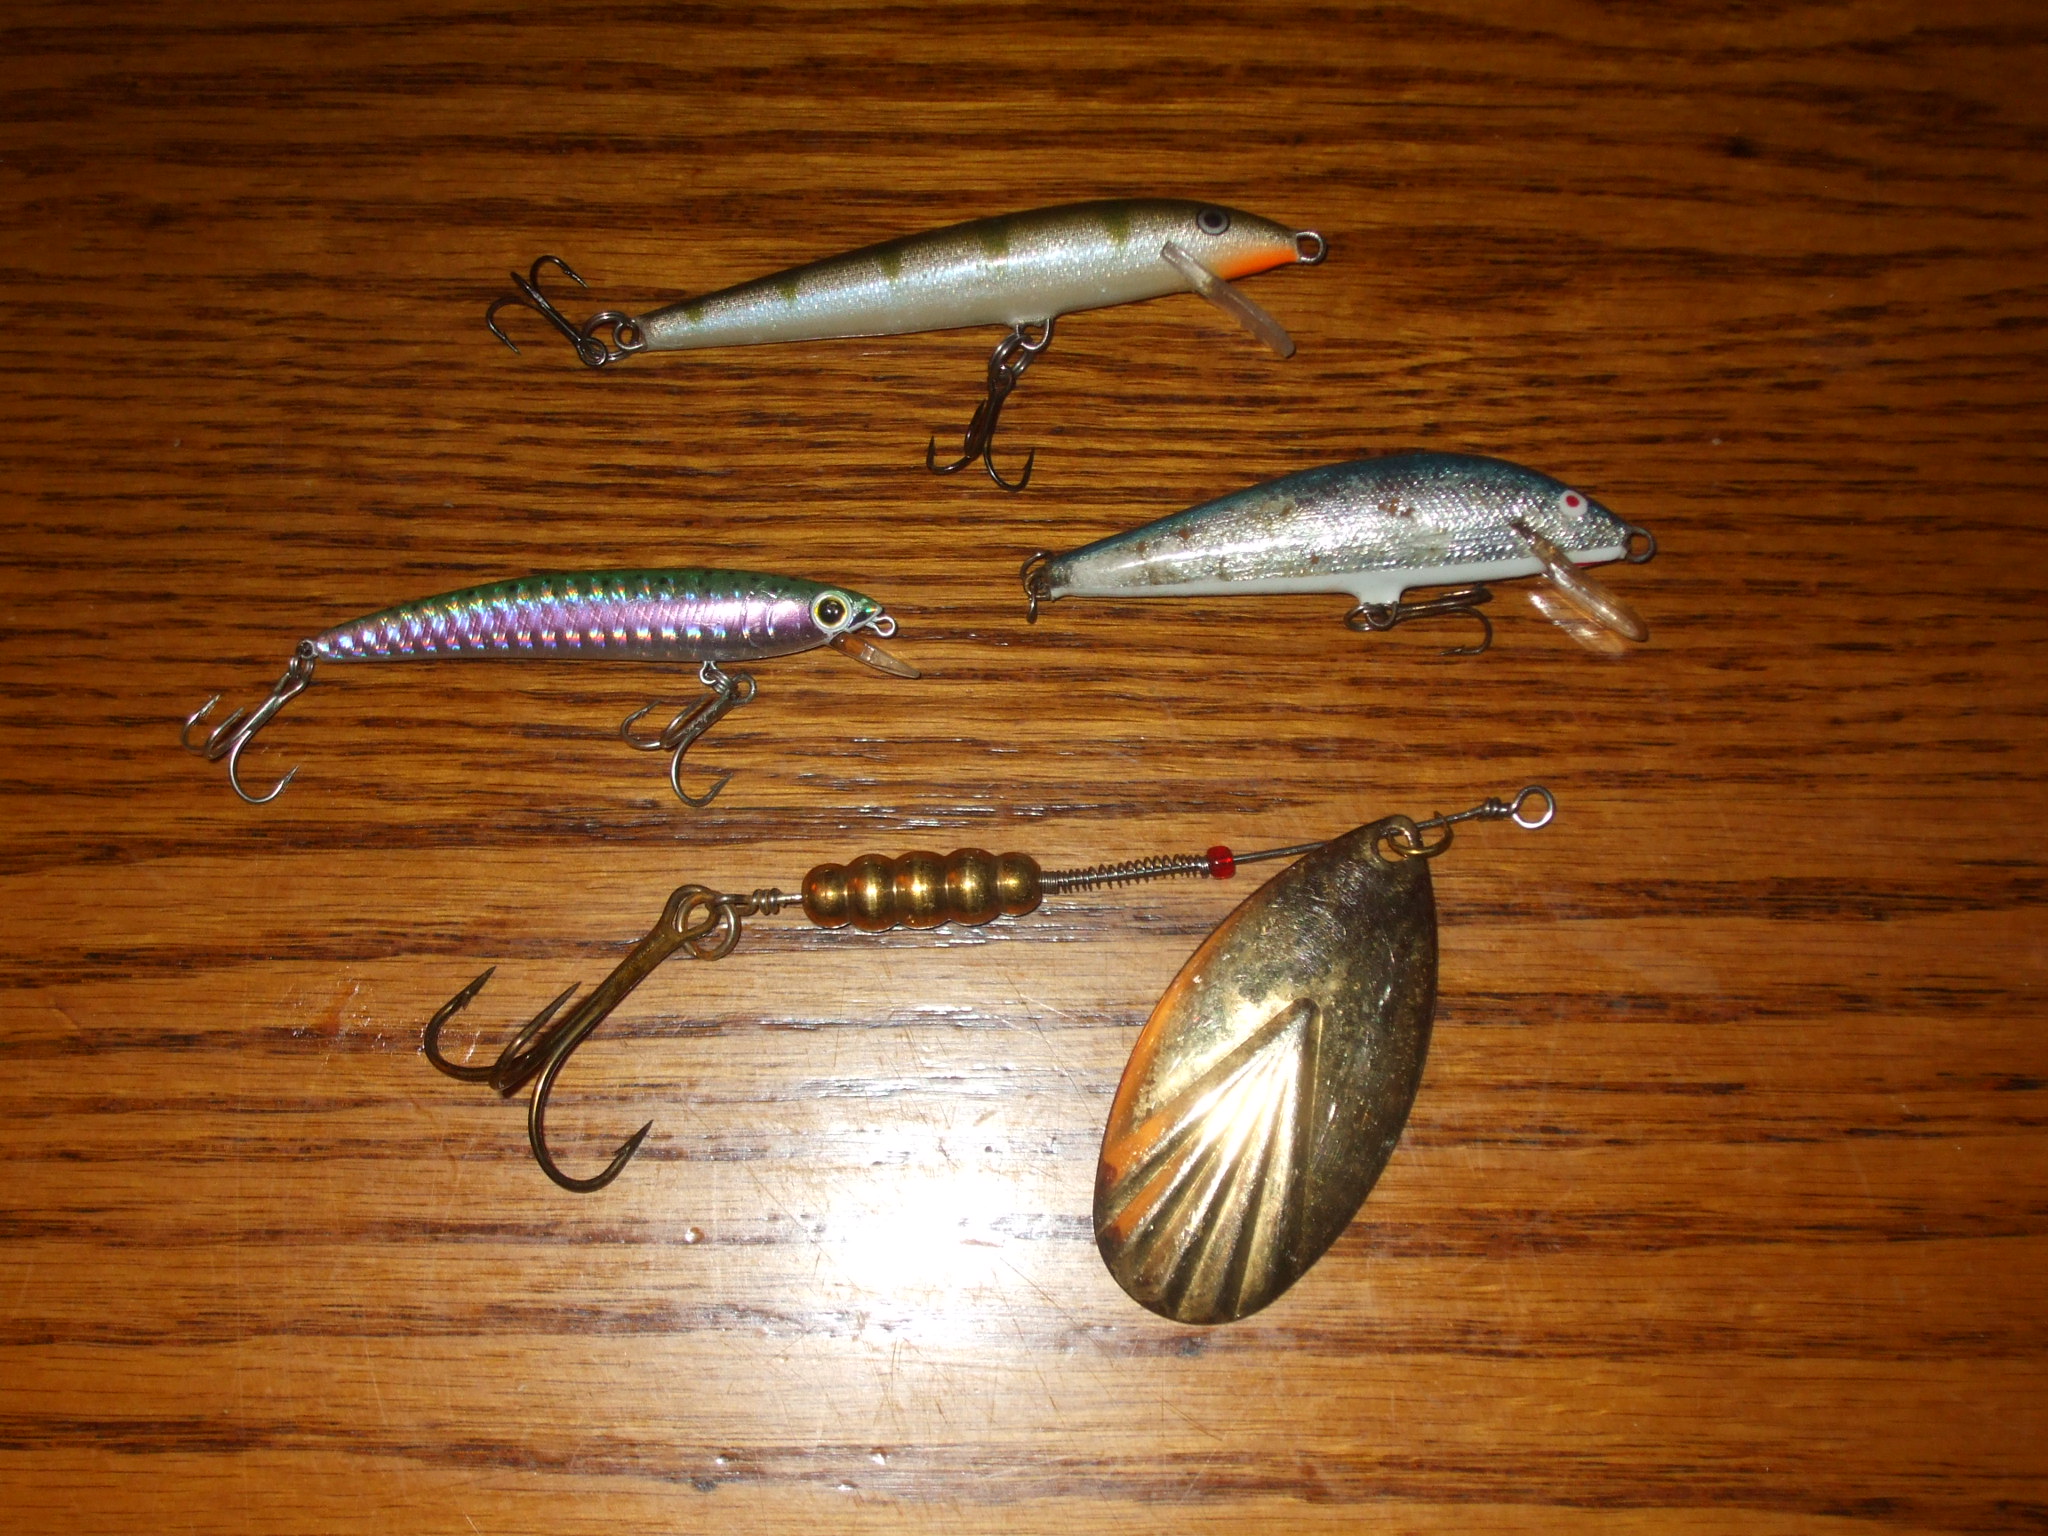 Losing tackle to pickerel/pike - Fishing Tackle - Bass Fishing Forums